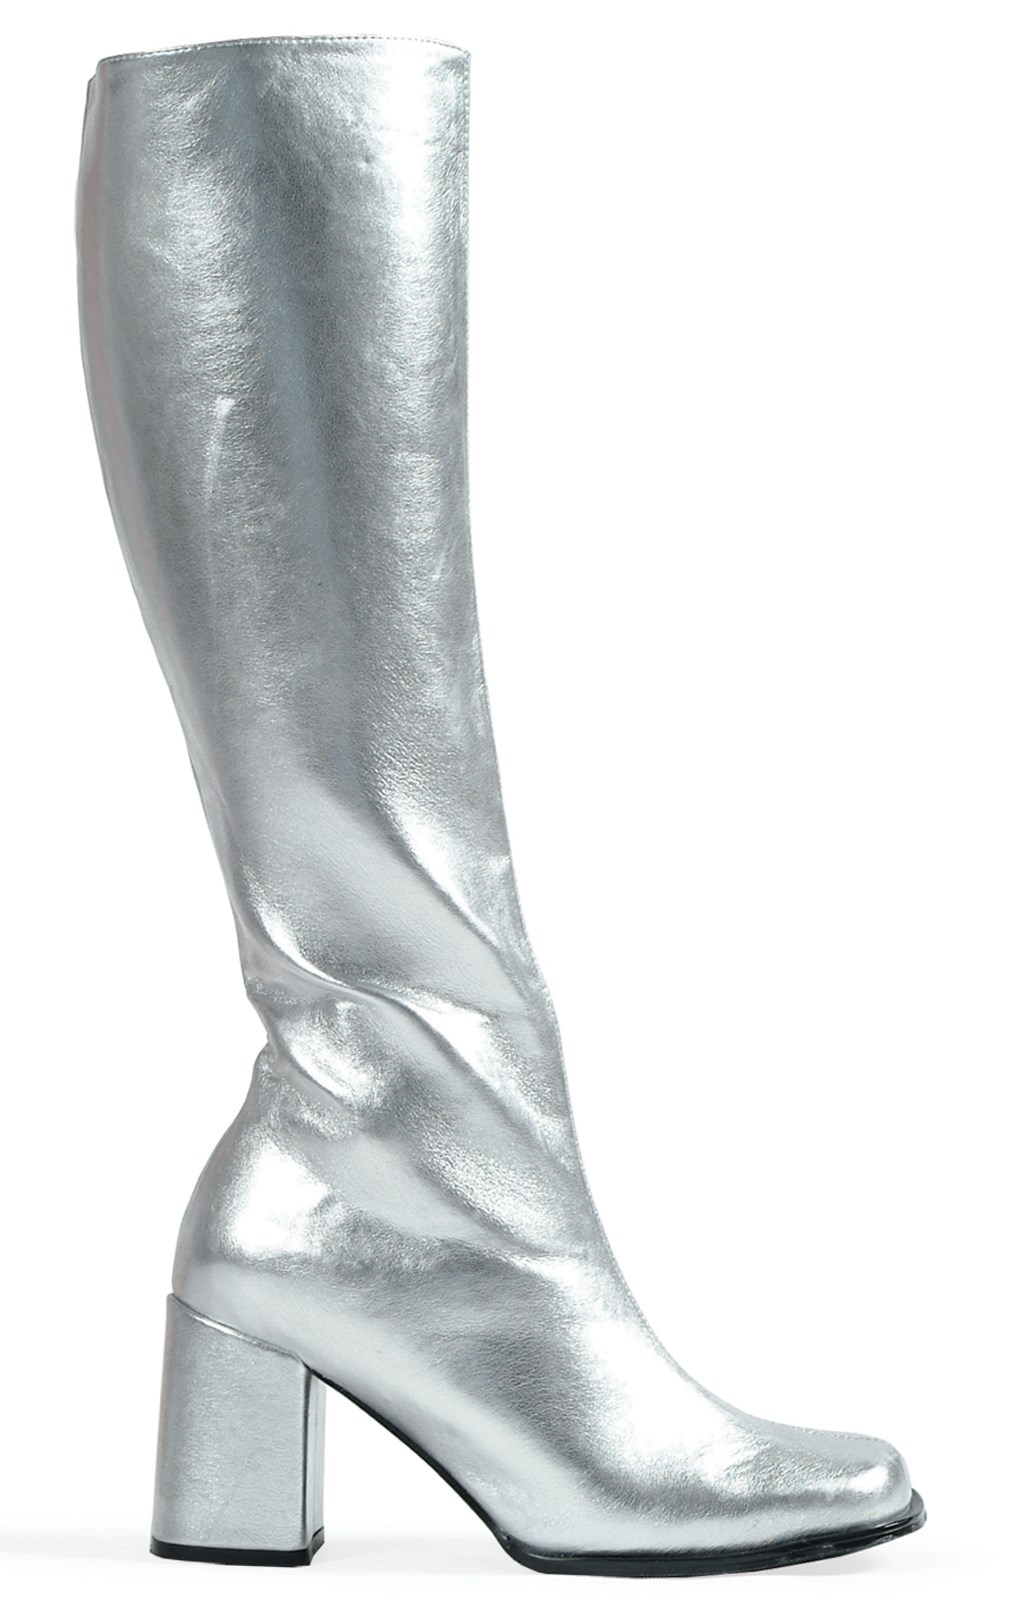 Gogo (Silver) Adult Boots